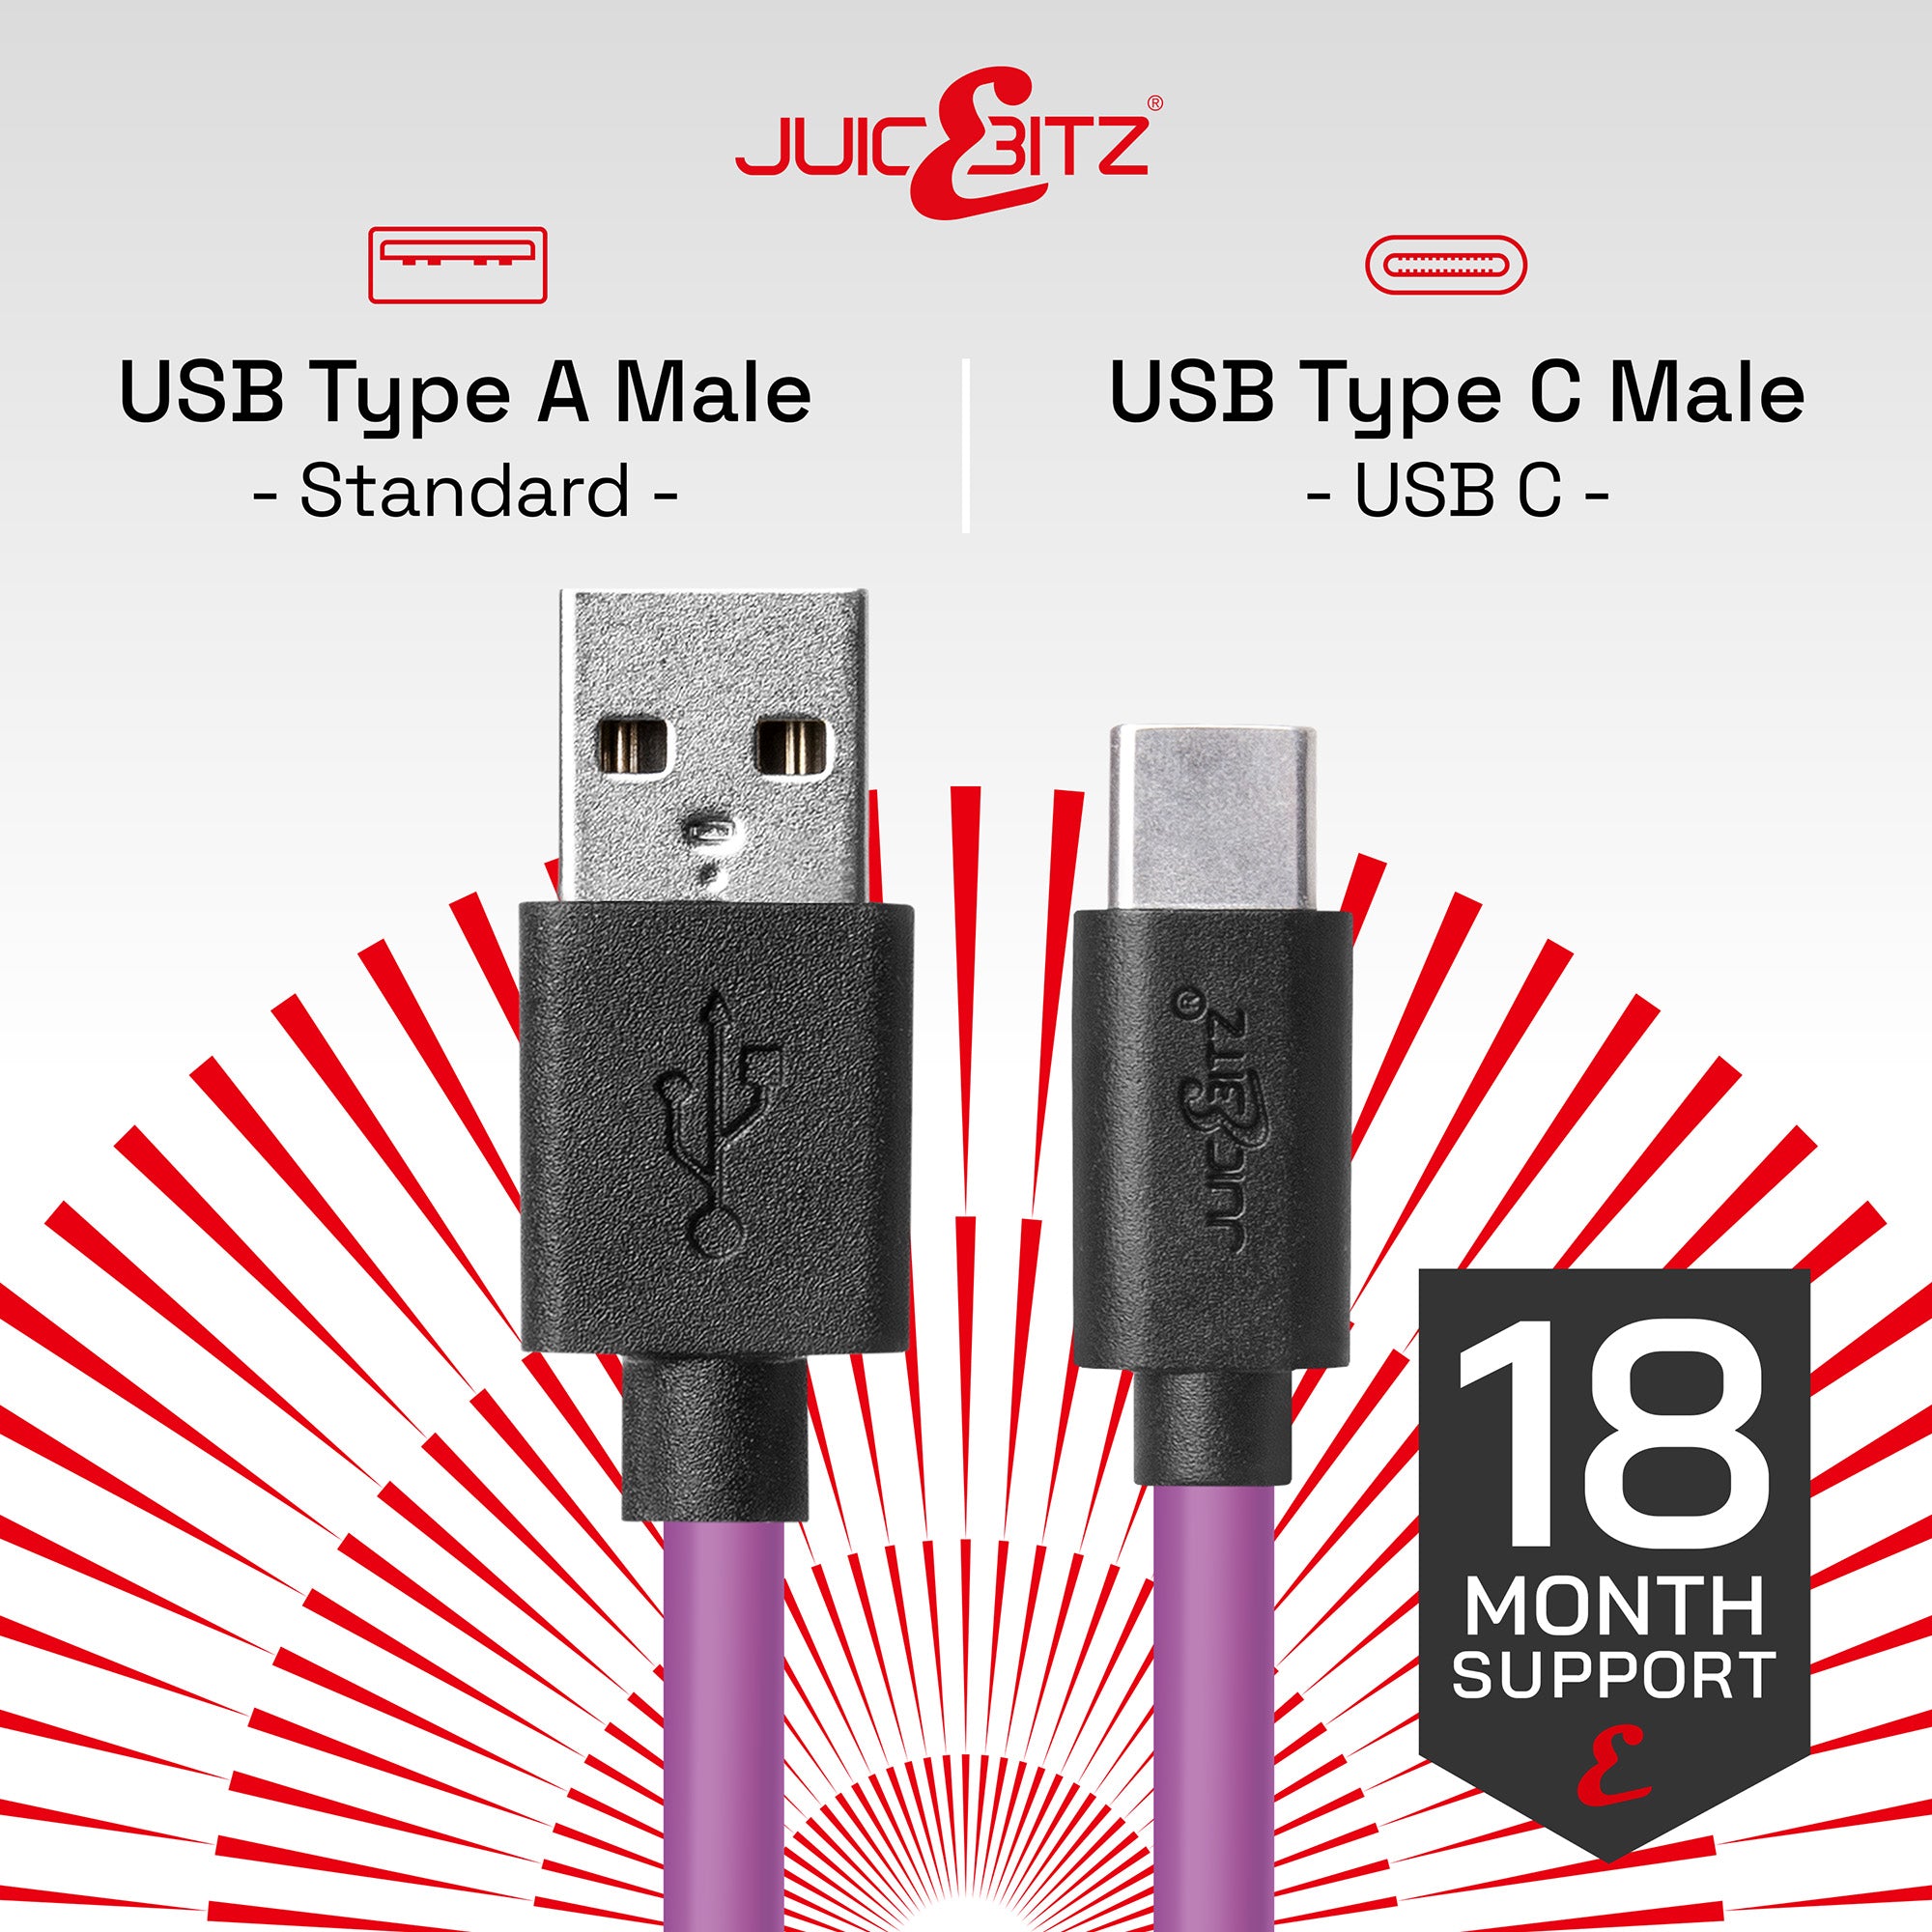 USB 2.0 Male to USB-C 3A Fast Charger Data Cable - Purple